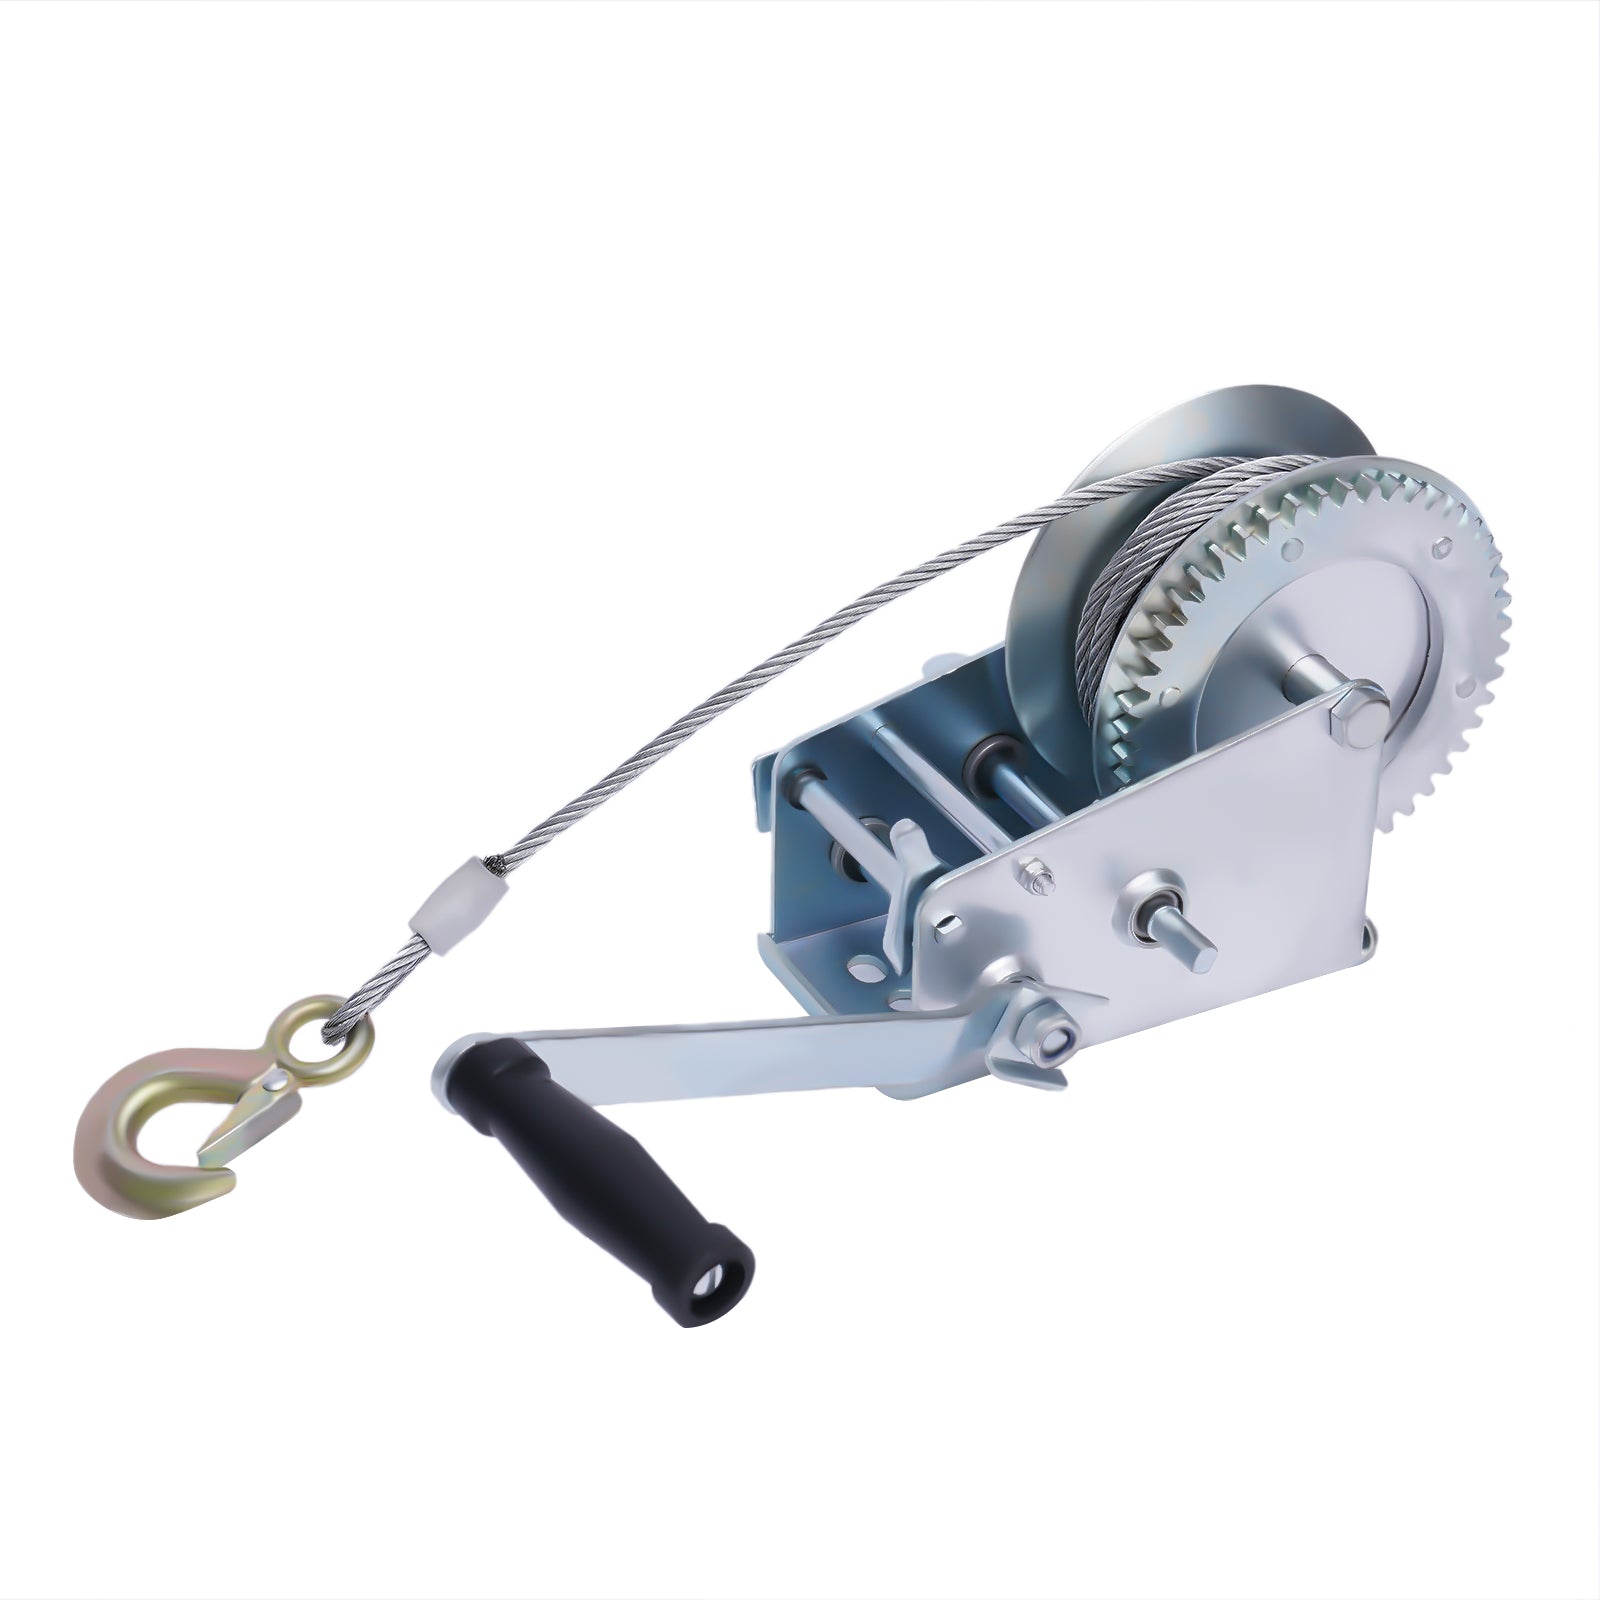 Manual 1200lbs Hand Winch with 10m Steel Wire Cable, Capacity: 500